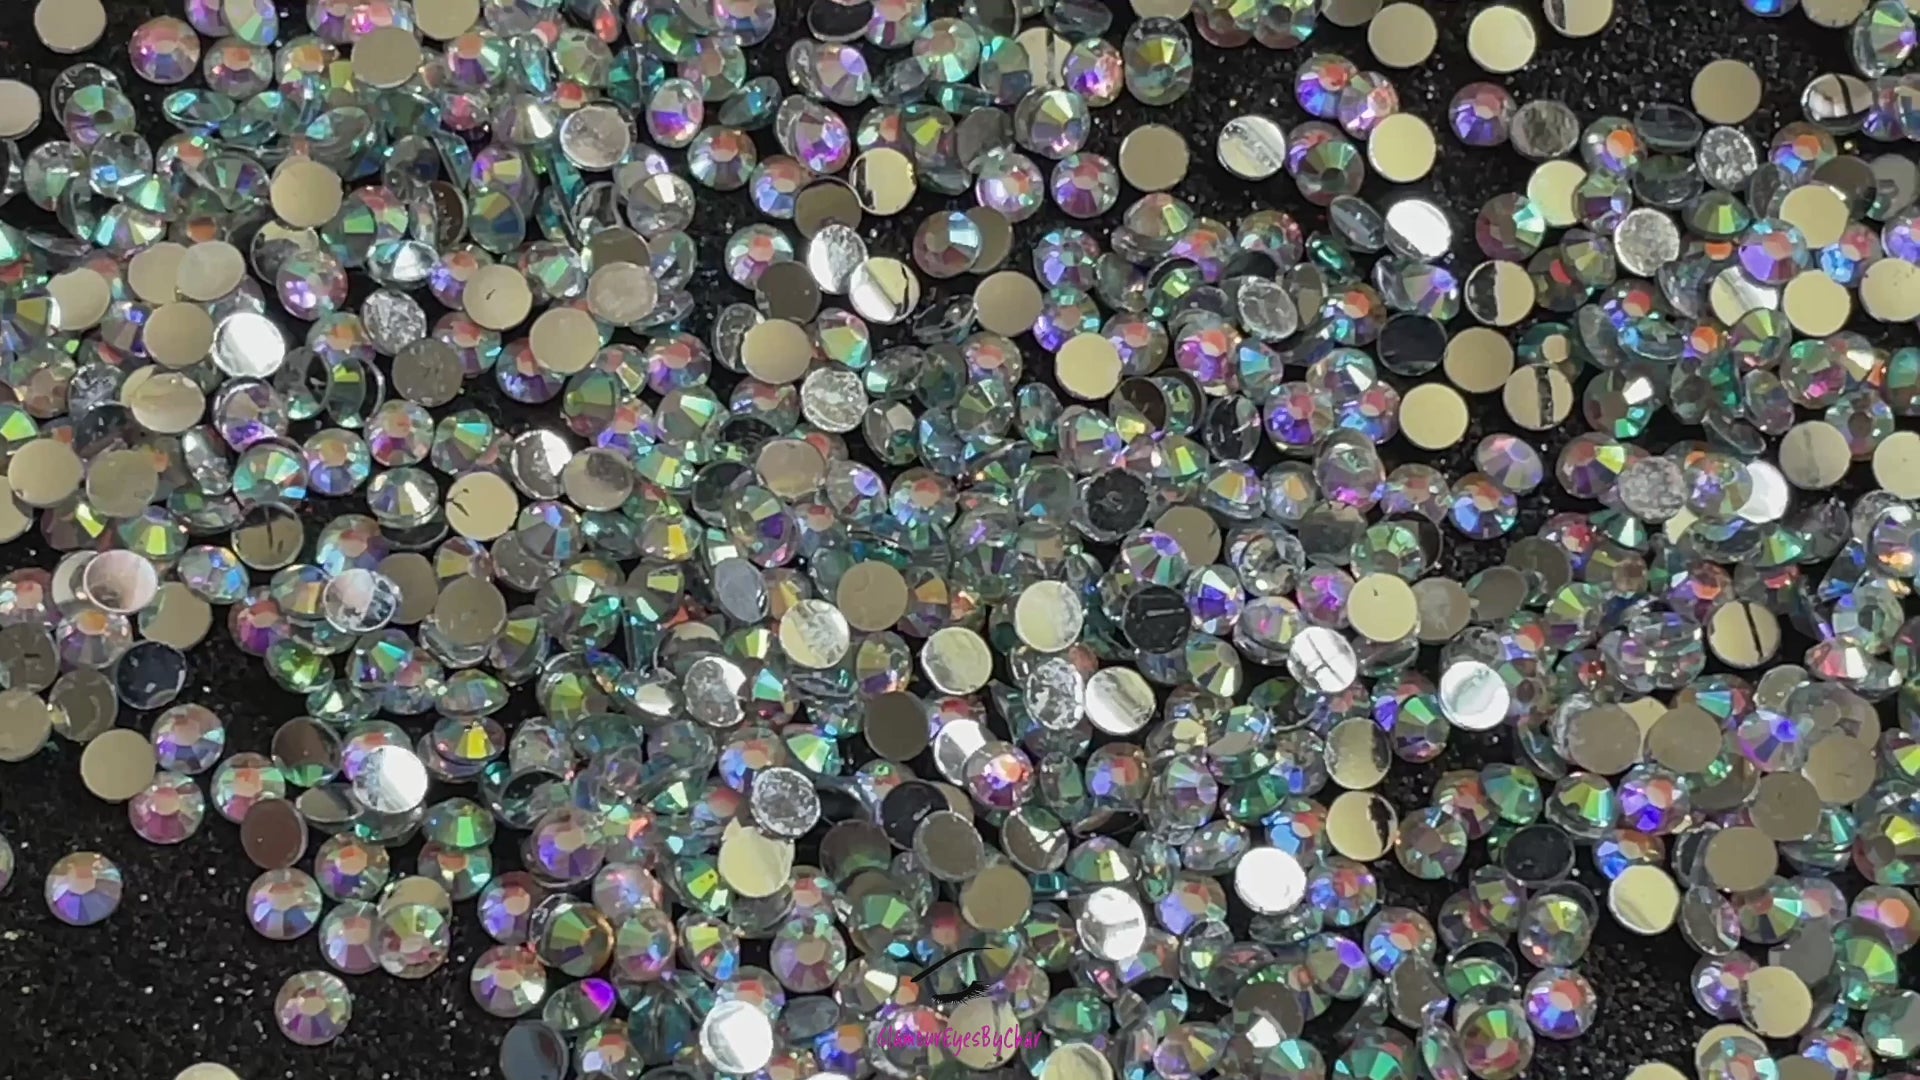 Spice up your nails or makeup look with these clear AB flatback resin rhinestones.  Stone size: 2mm and 3mm Available in 5g and 10g jars.  Note: 10g jars are round and not diamond shaped. Rhinestones are not counted individually and go by the weight of the jar.  Tip#1:  Apply rhinestones with our crystal dual-ended rhinestone picker. The application process will be made quick and easy.